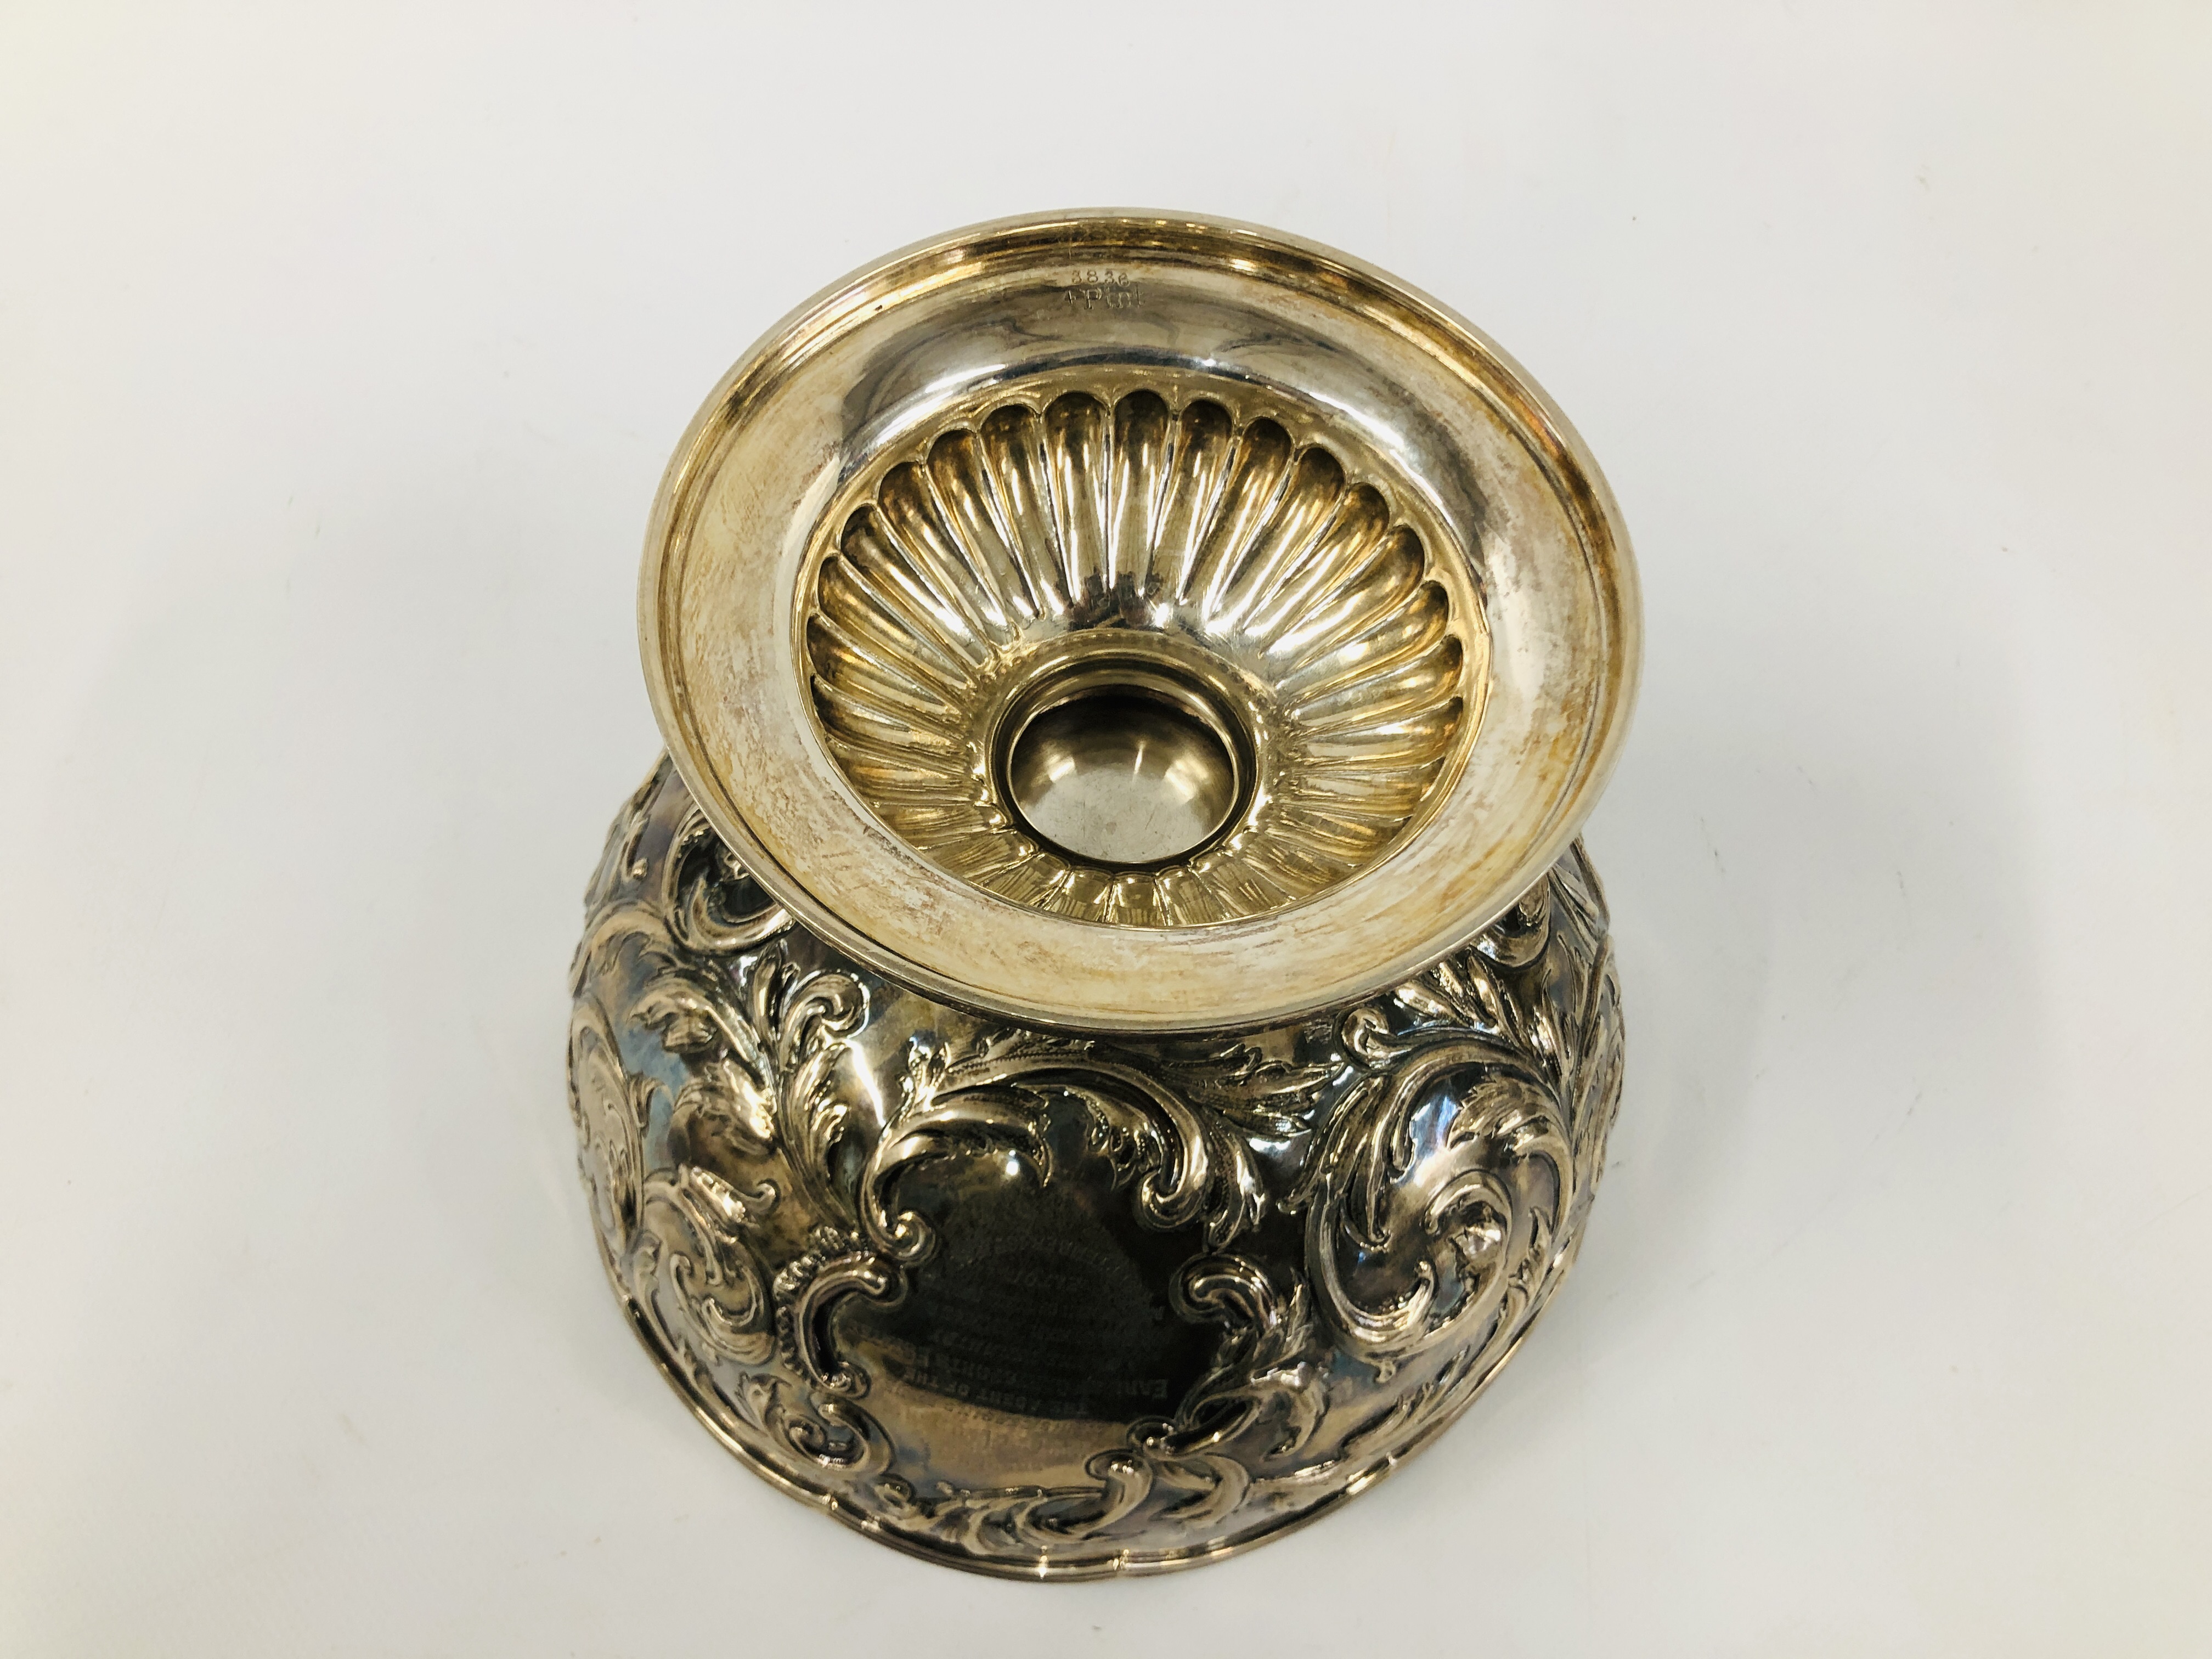 A VICTORIAN SILVER FOOTED ROSE BOWL THE WAVY RIM ABOVE SCROLLED LEAF DECORATION, - Image 10 of 11